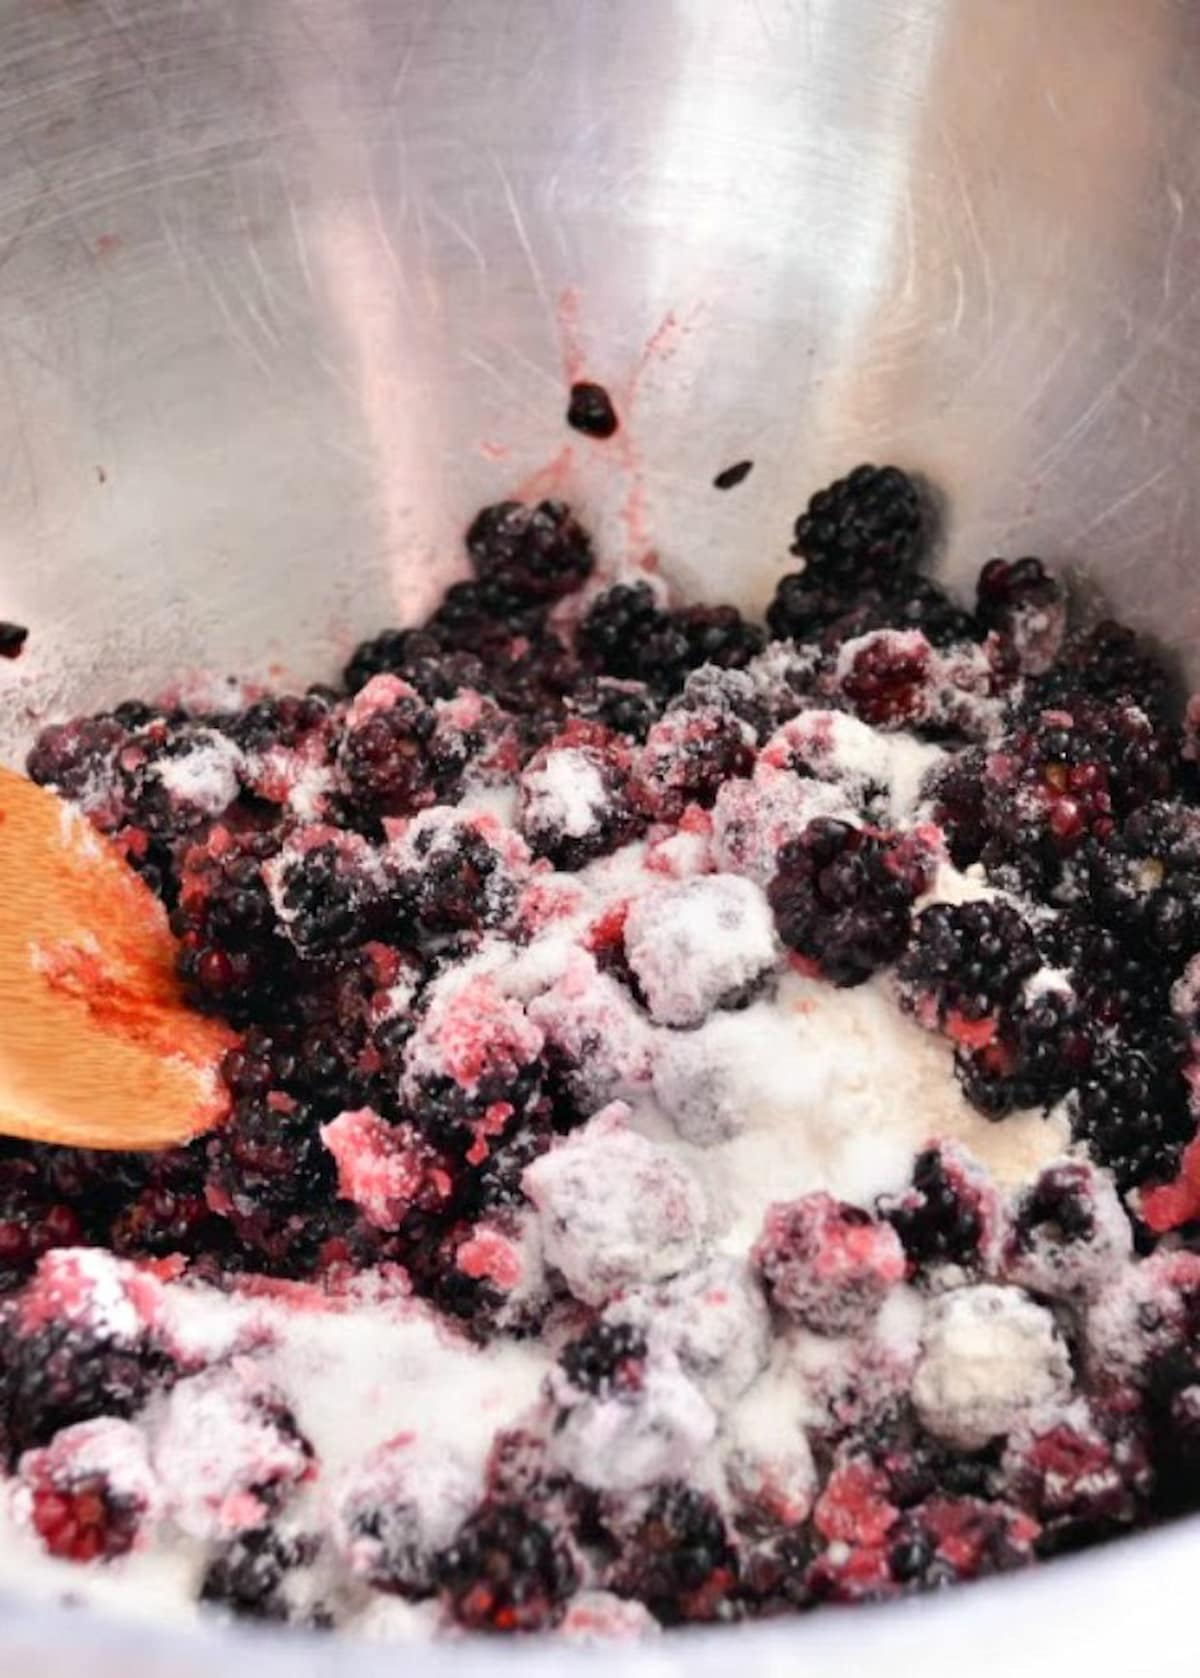 Blackberries, Sugar, and Flour in a mixing bowl for Blackberry Cobbler.